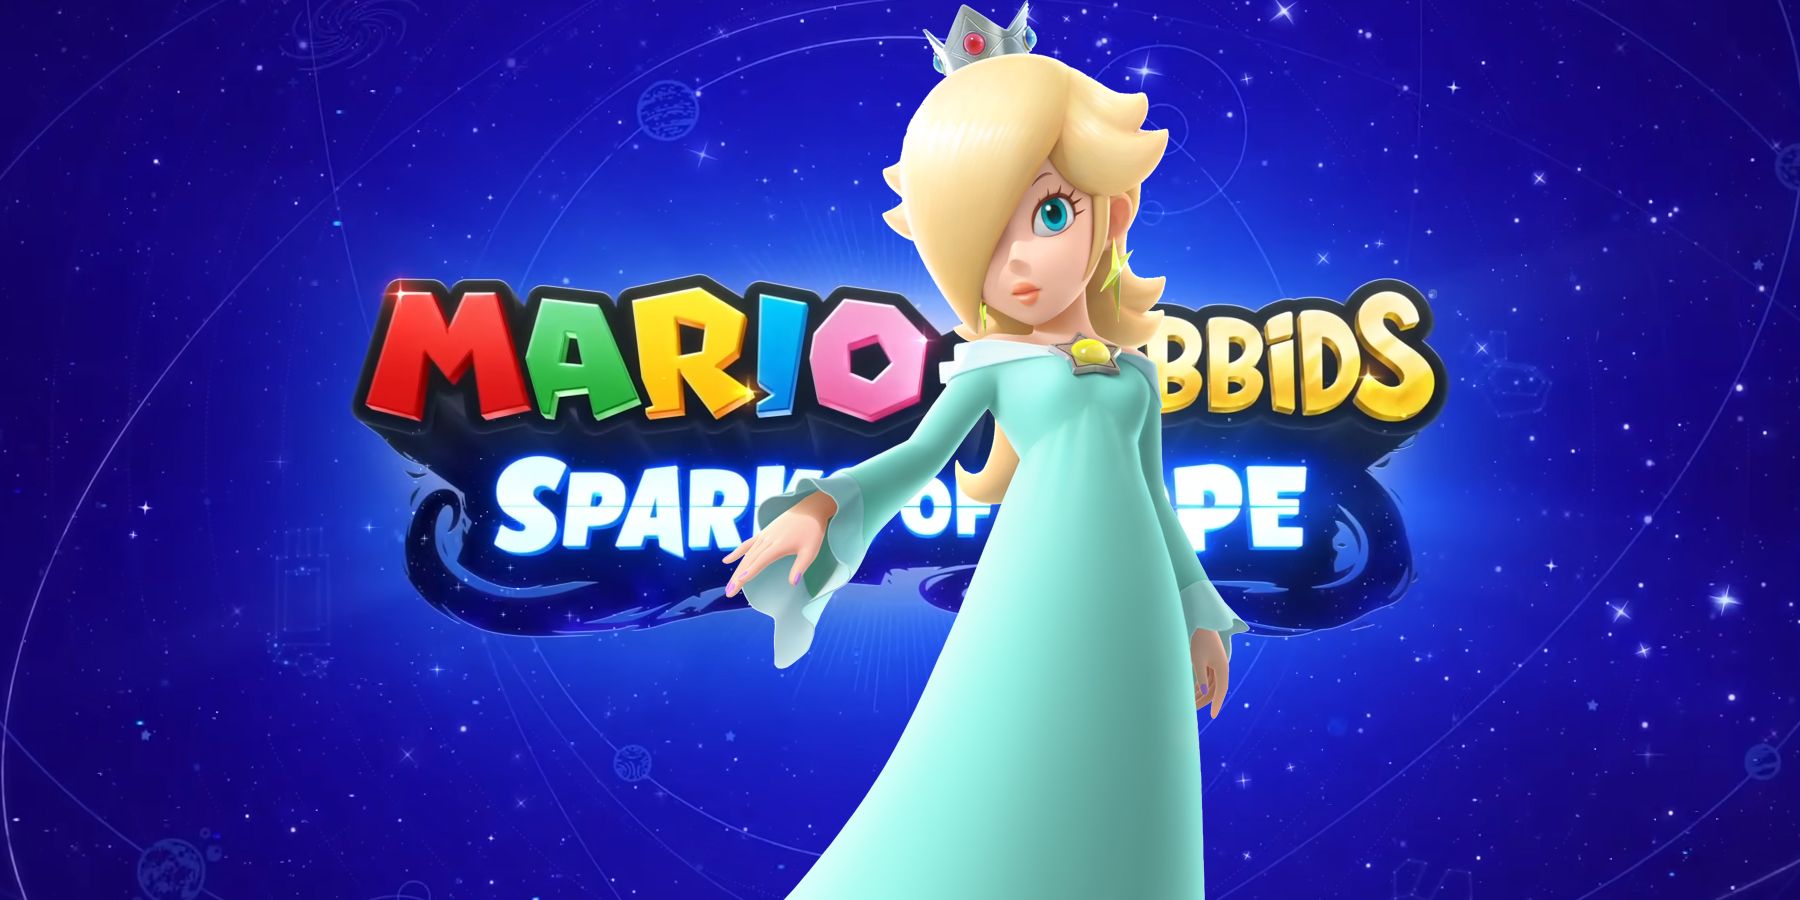 Mario + Rabbids Sparks of hope title with Rosalia